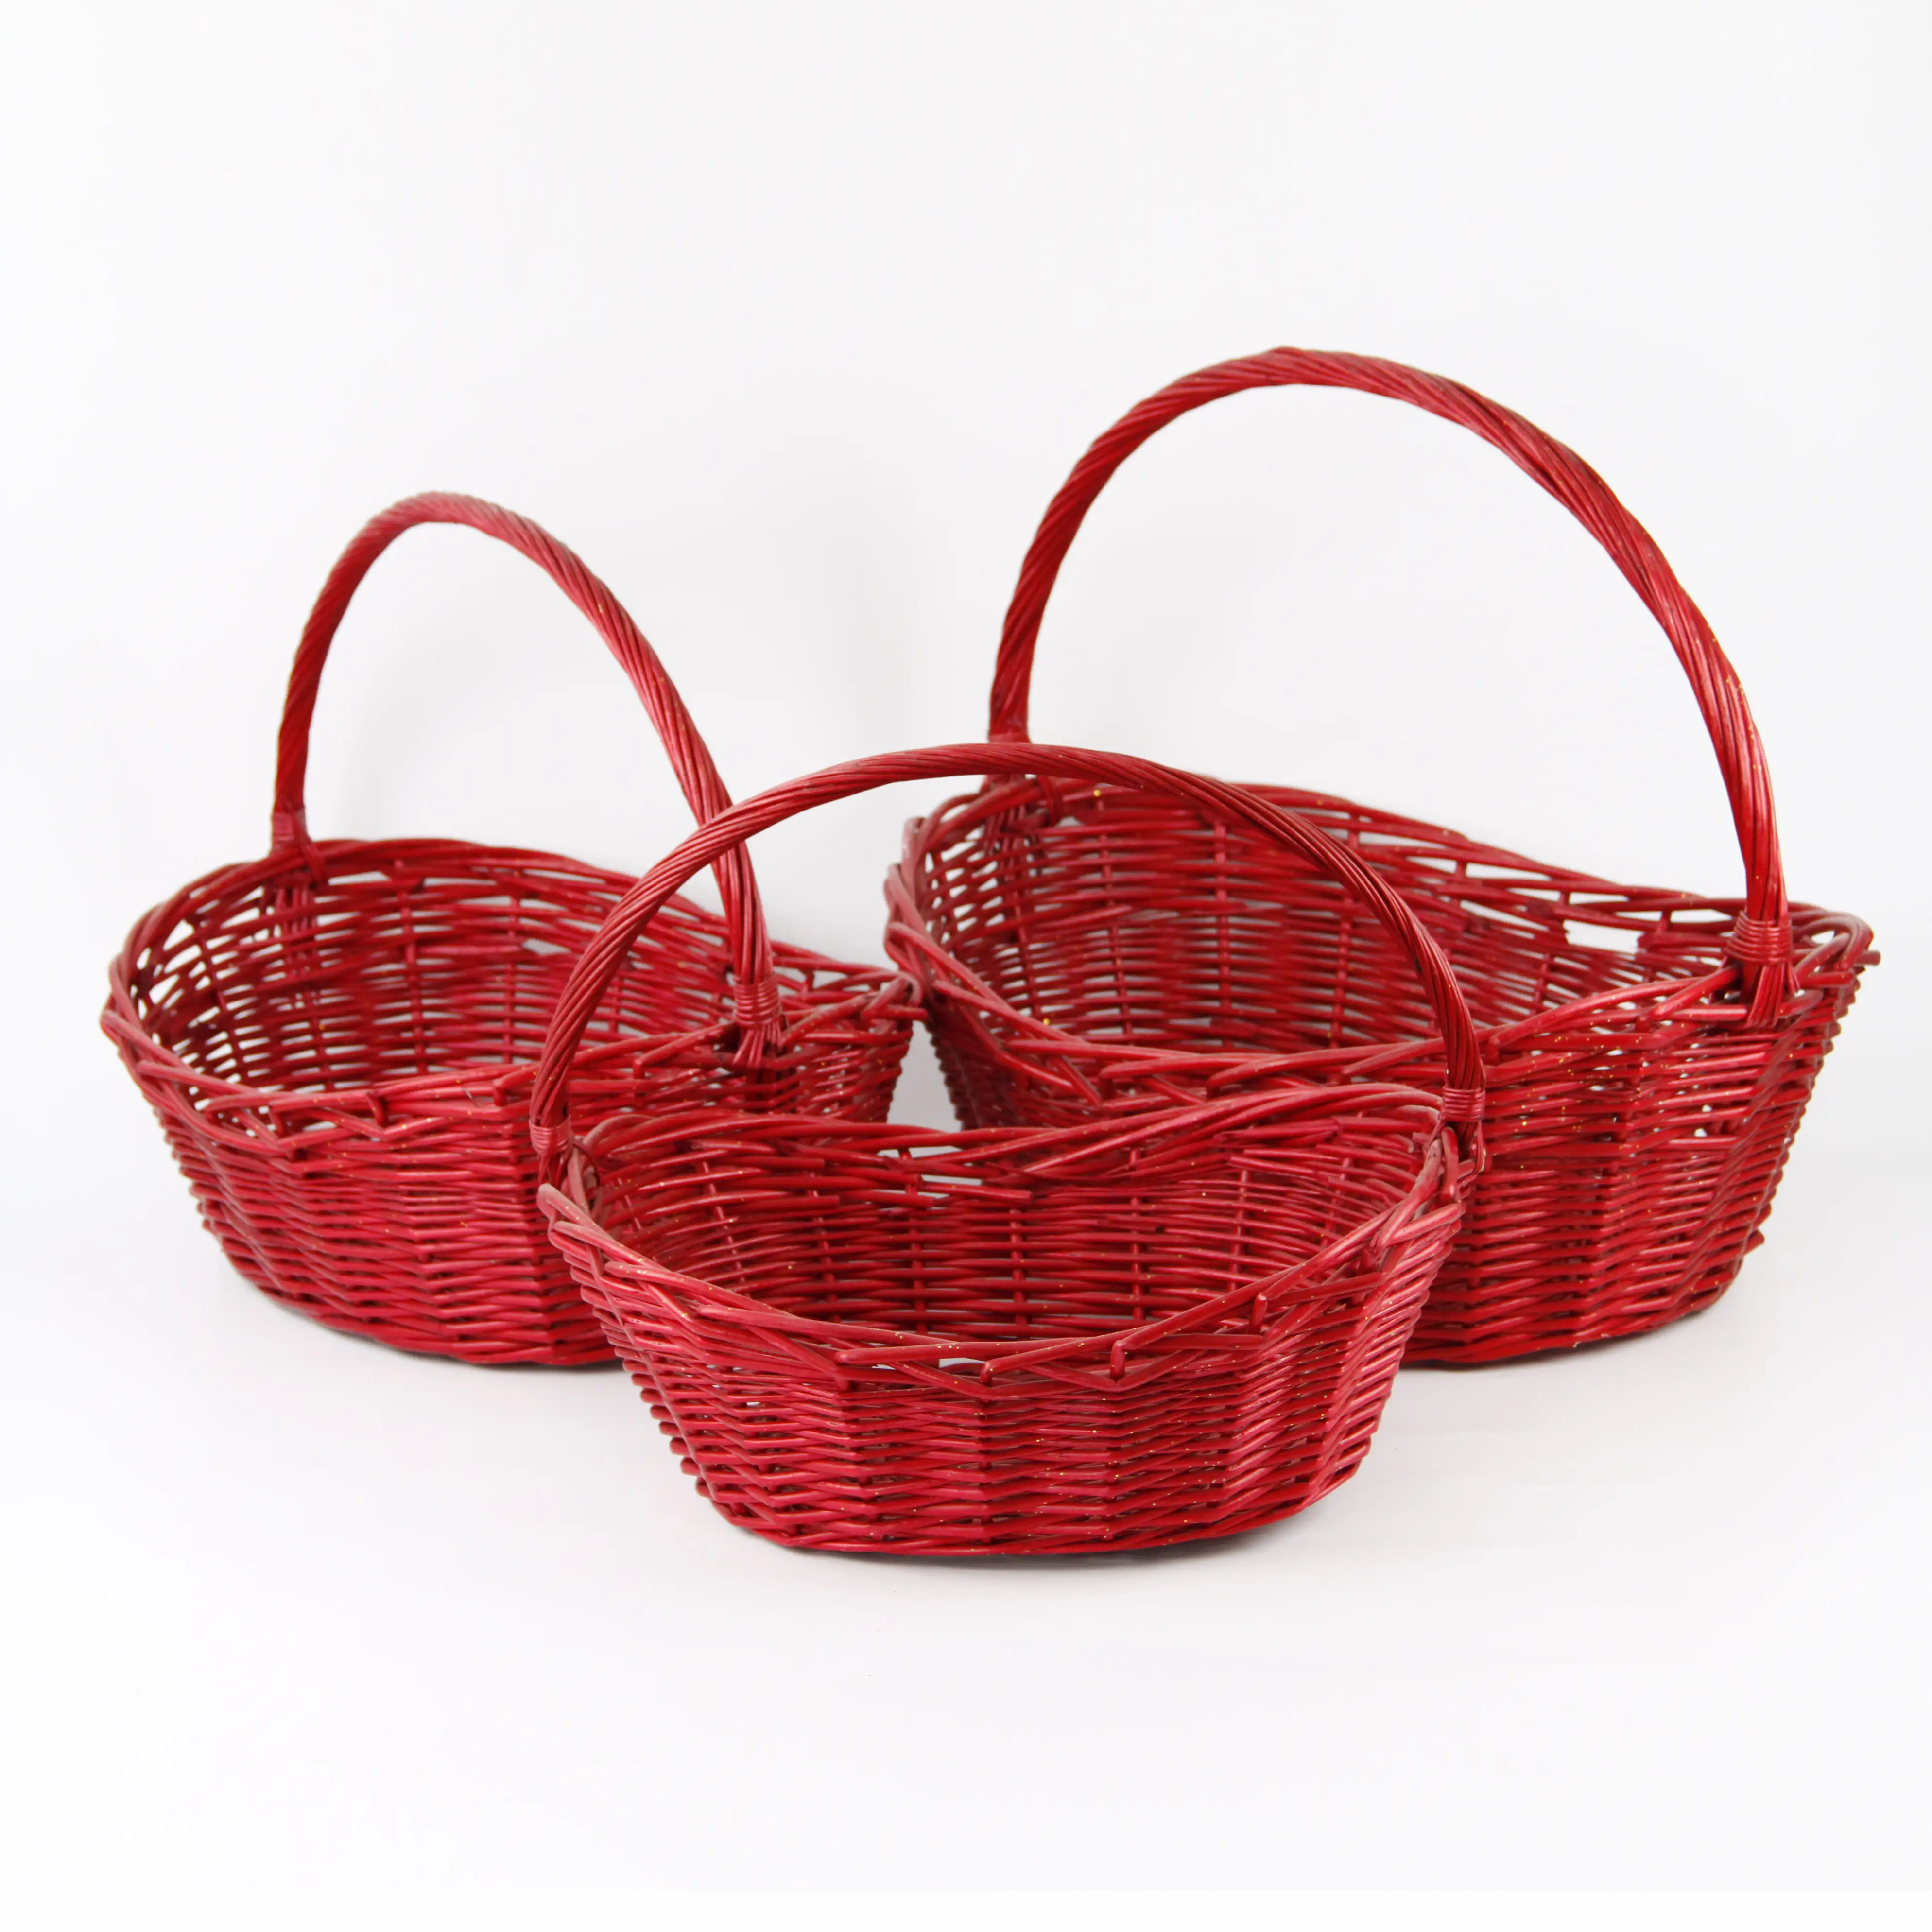 Kingwillow High Quality Custom Big Red Willow Wicker Storage Baskets with handles